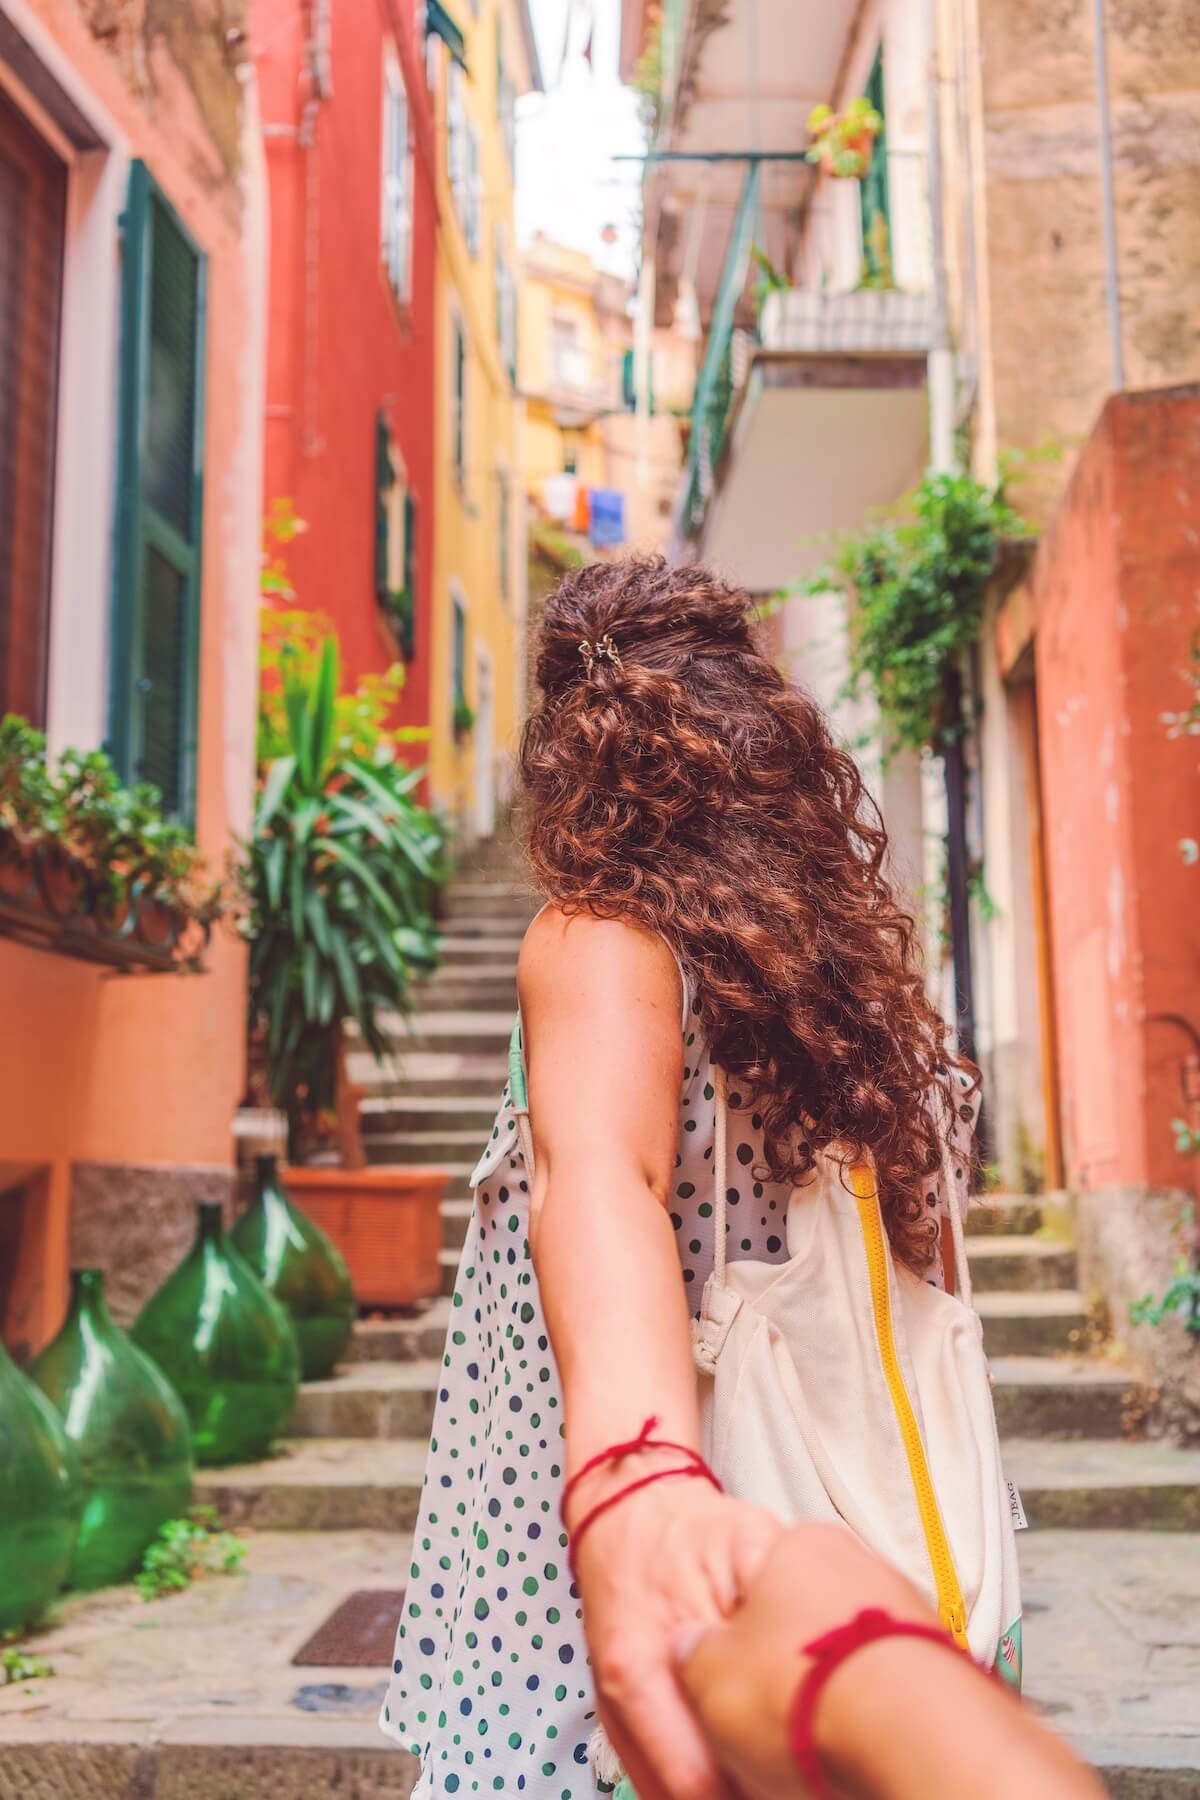 Europe Travel Essentials Checklist photo of a woman with long curly brown hair wearing a sundress leading an unknown person up a narrow colourful street in Europe